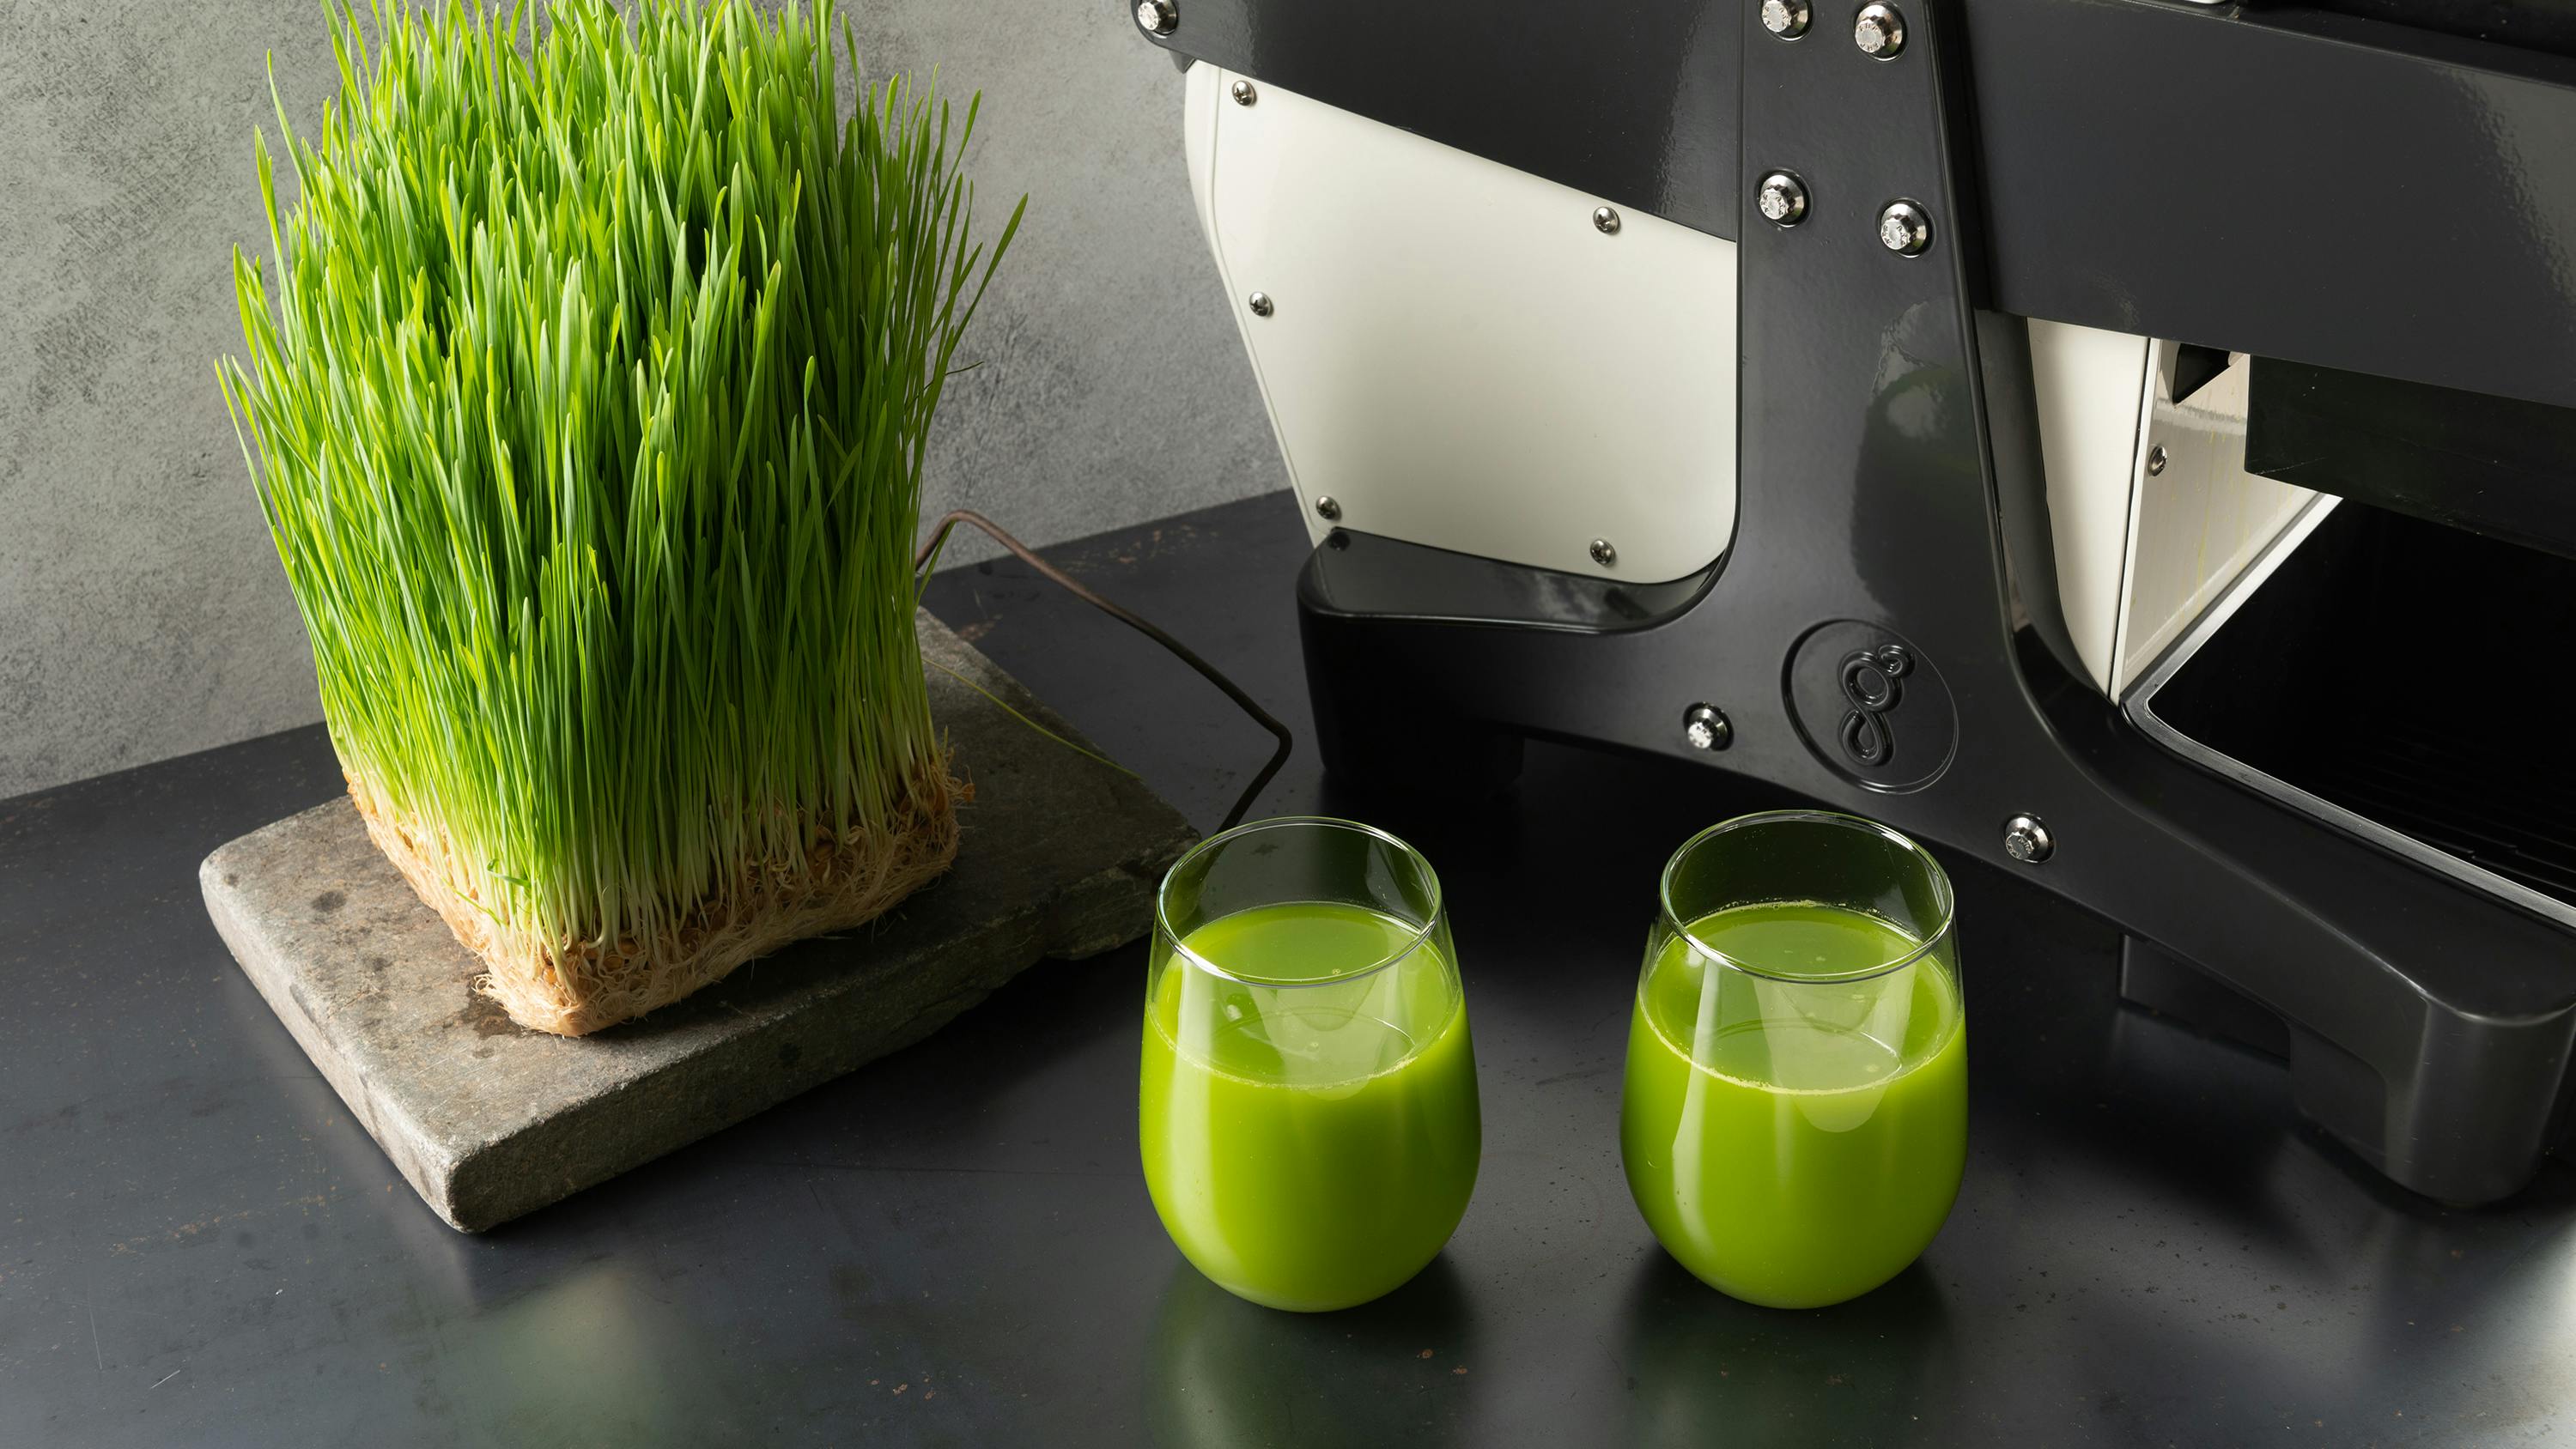 two glasses of green juice next to wheatgrass and the Goodnature M-1 cold press juicer on a black countertop